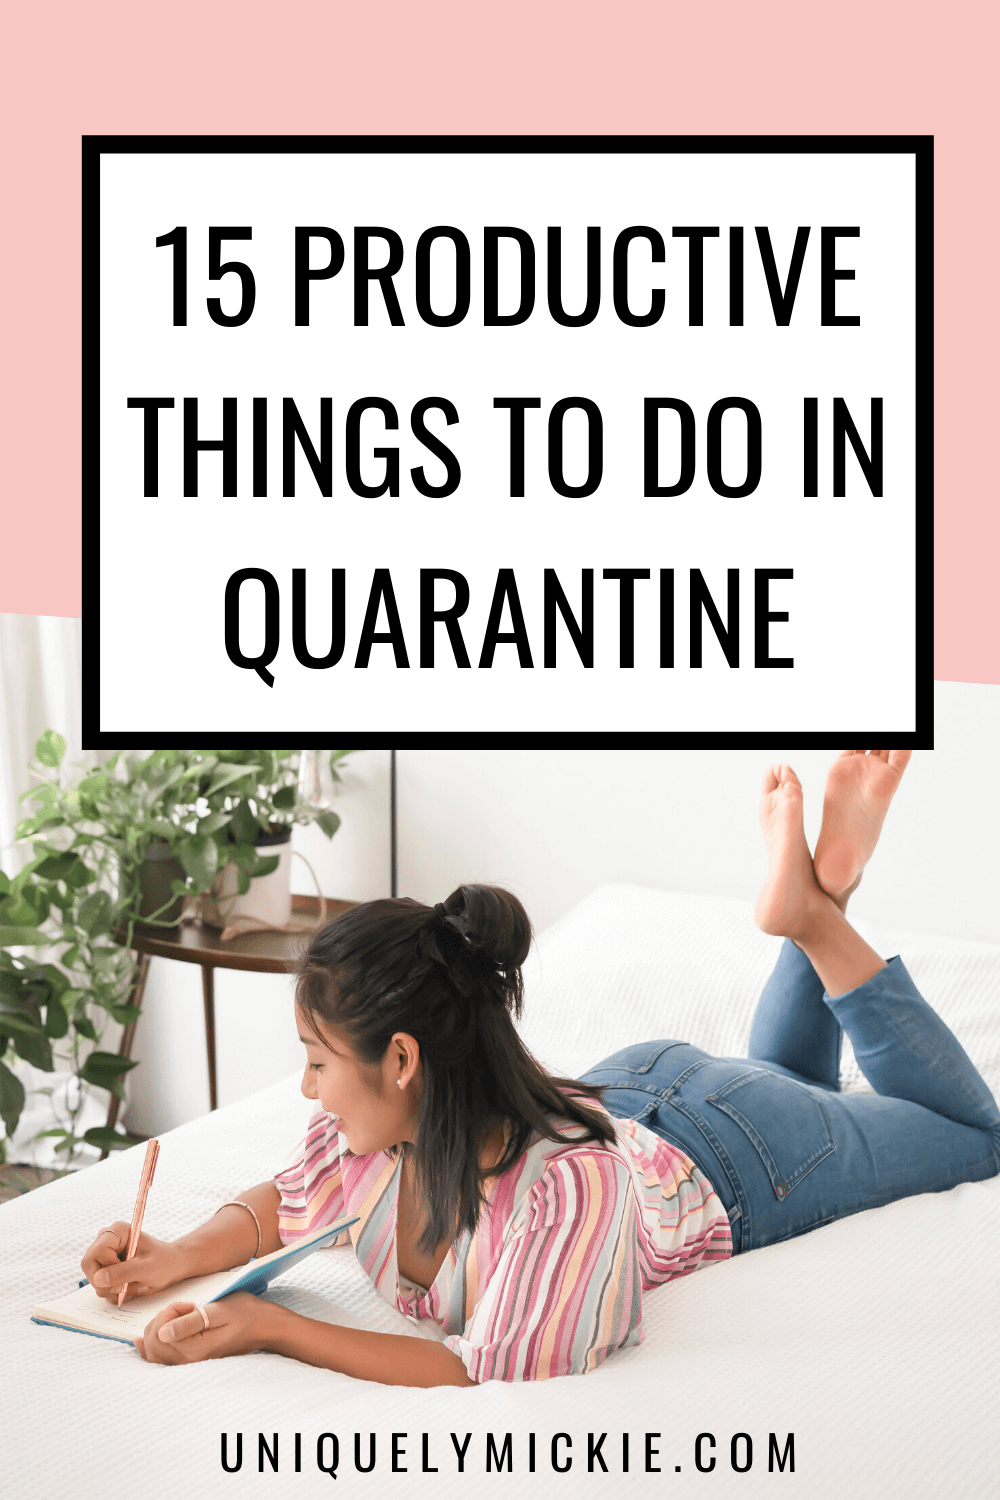 While the COVID-19 outbreak is in full swing around the world, it’s now more important than ever to stay at home and be quarantine for a few days for everyone’s safety. I’m sharing in today’s blog post 15 productive things you can do at home in quarantine. 